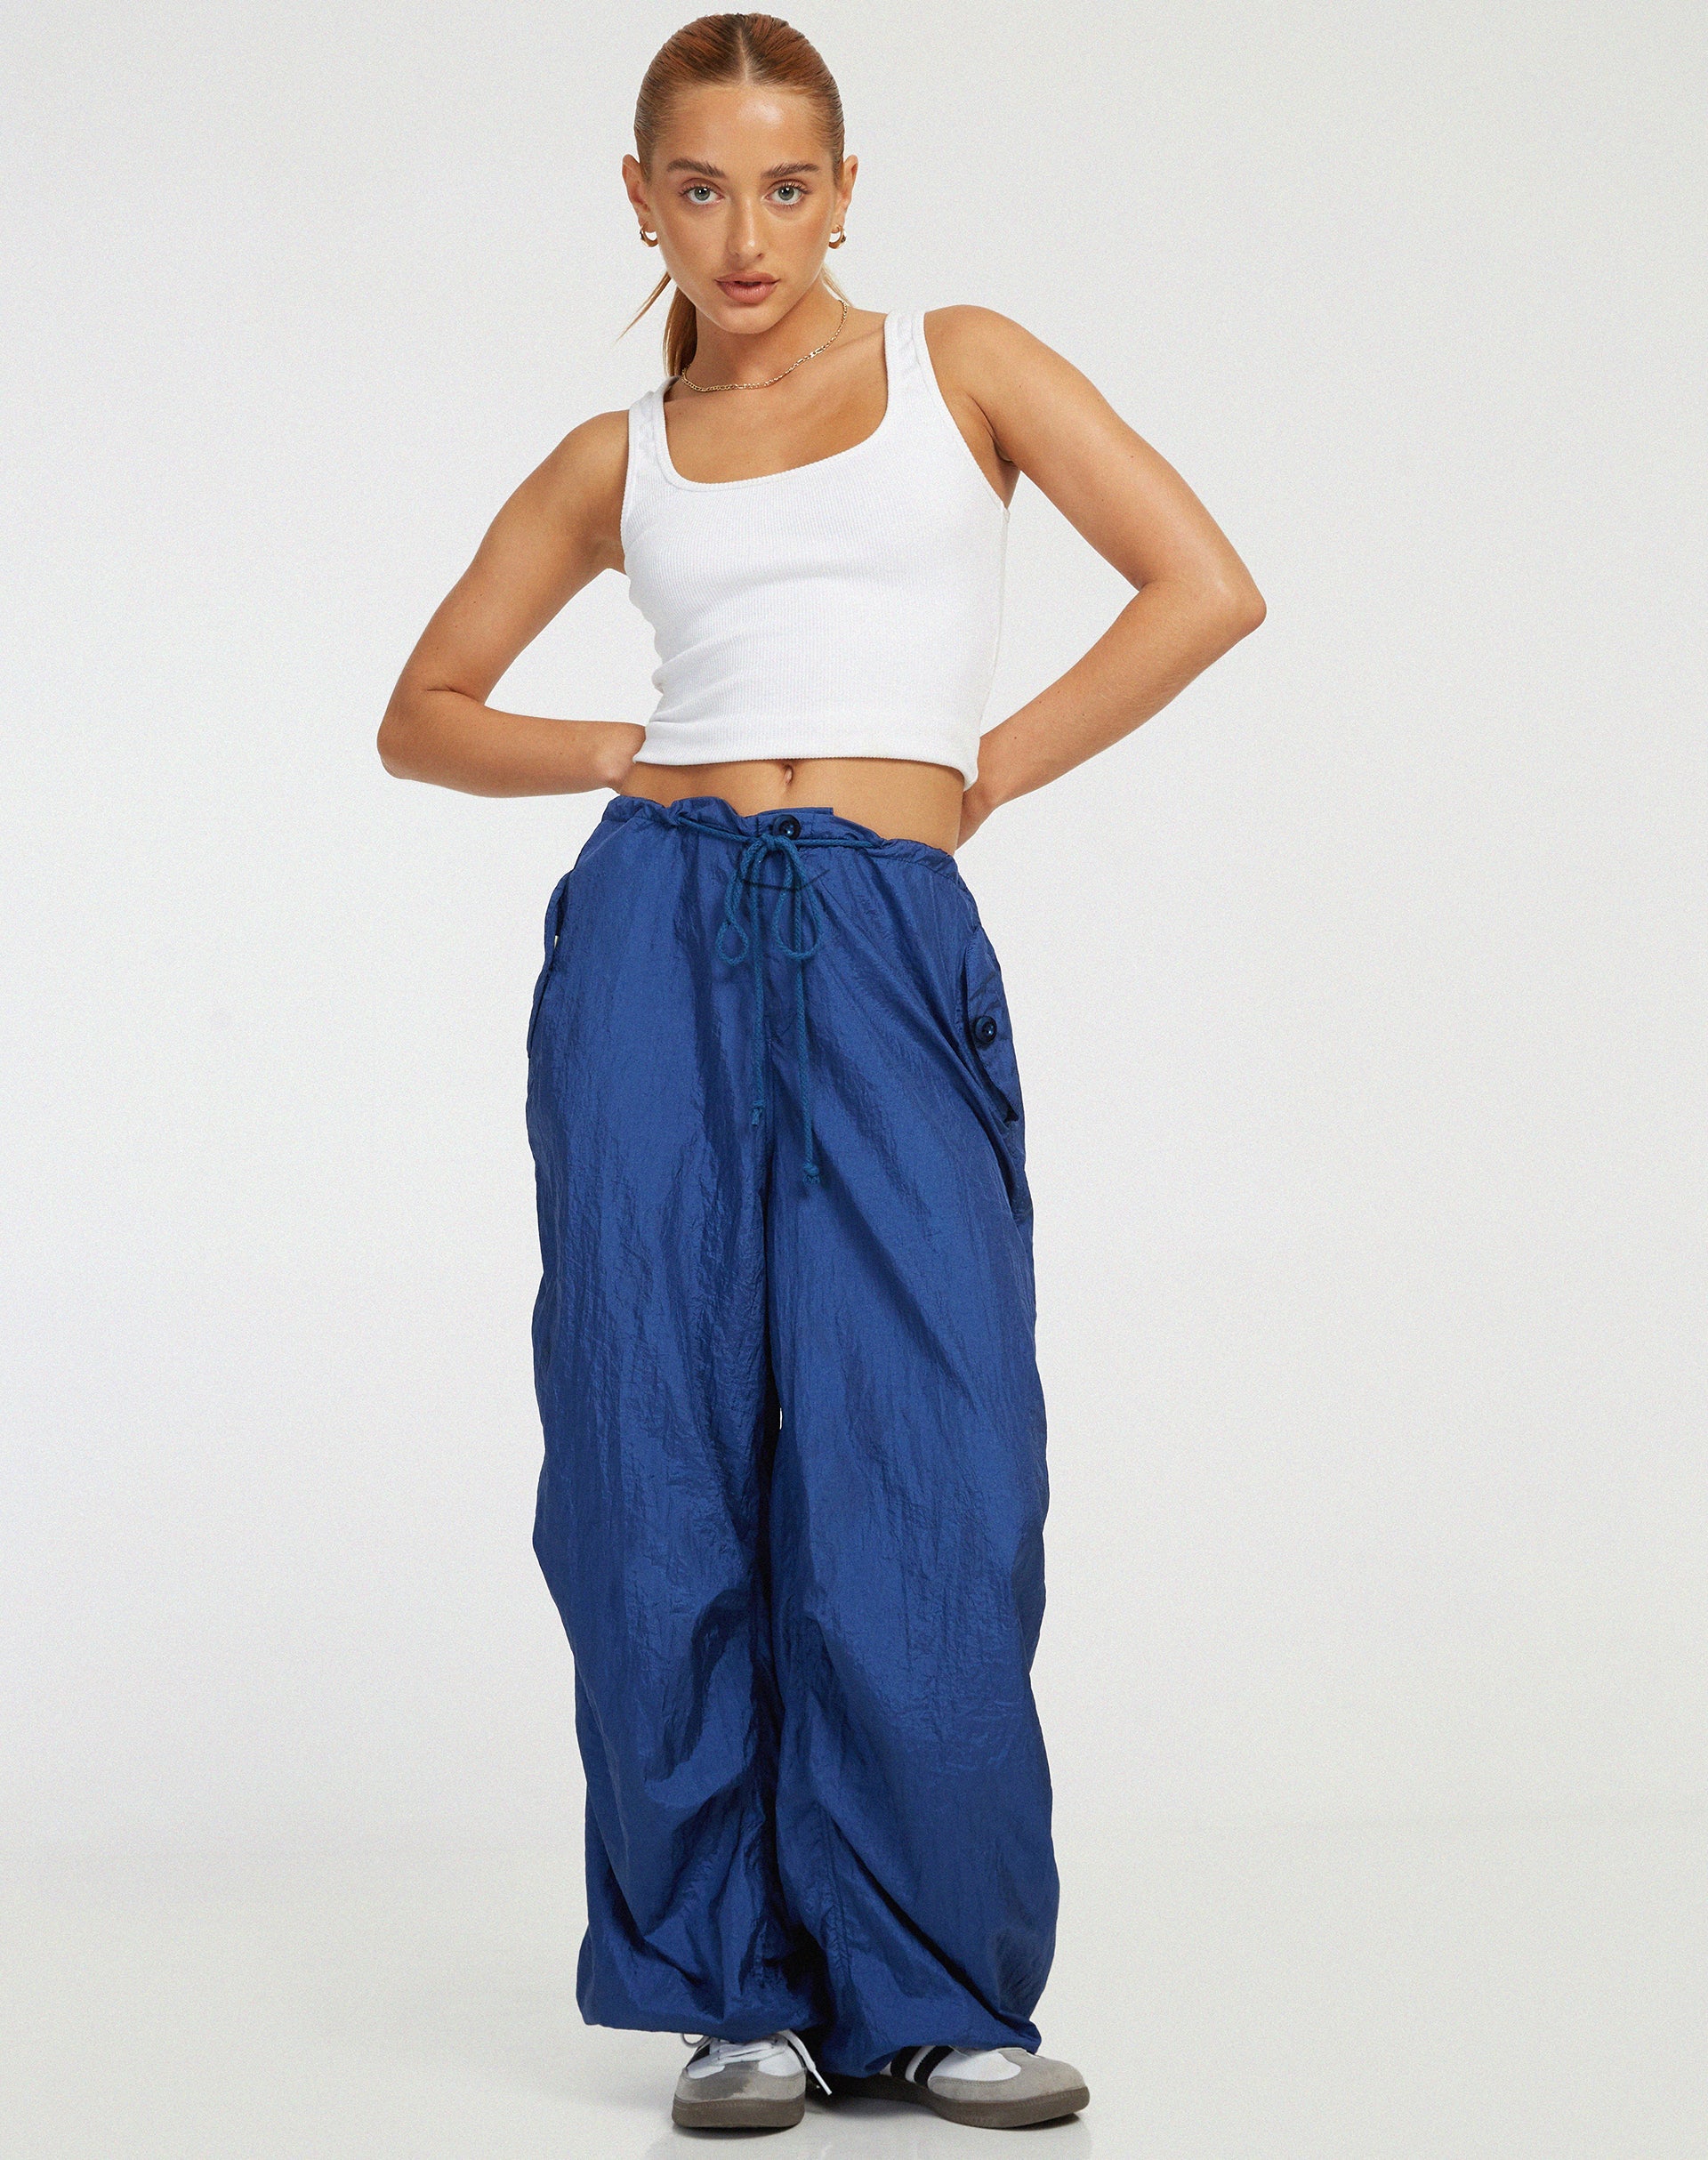 image of Chute Trouser in Navy